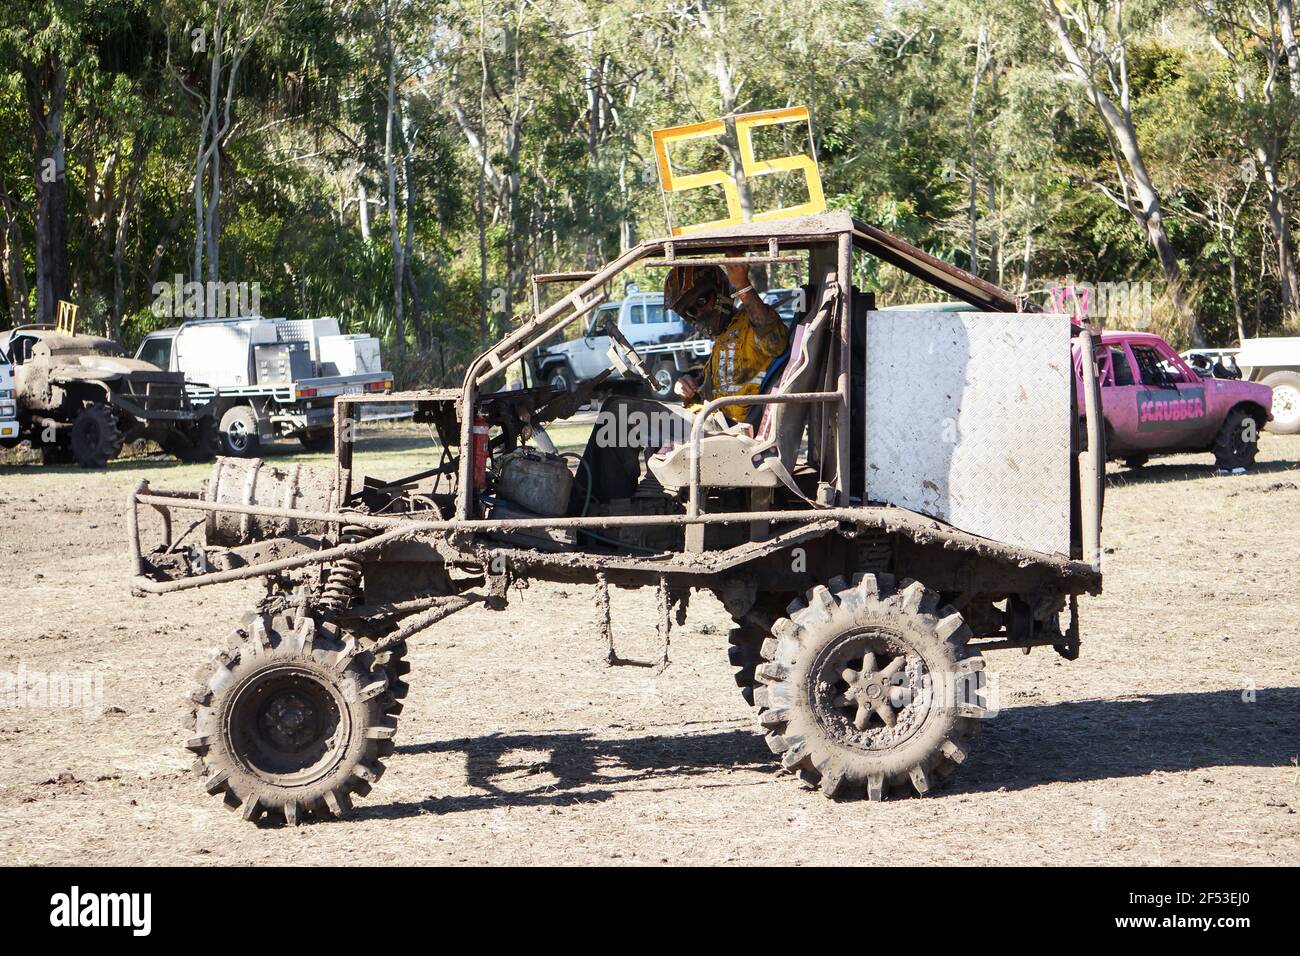 A home made mud racing vehicle splattered in mud after a race around the circuit in Queensland, Australia. Stock Photo